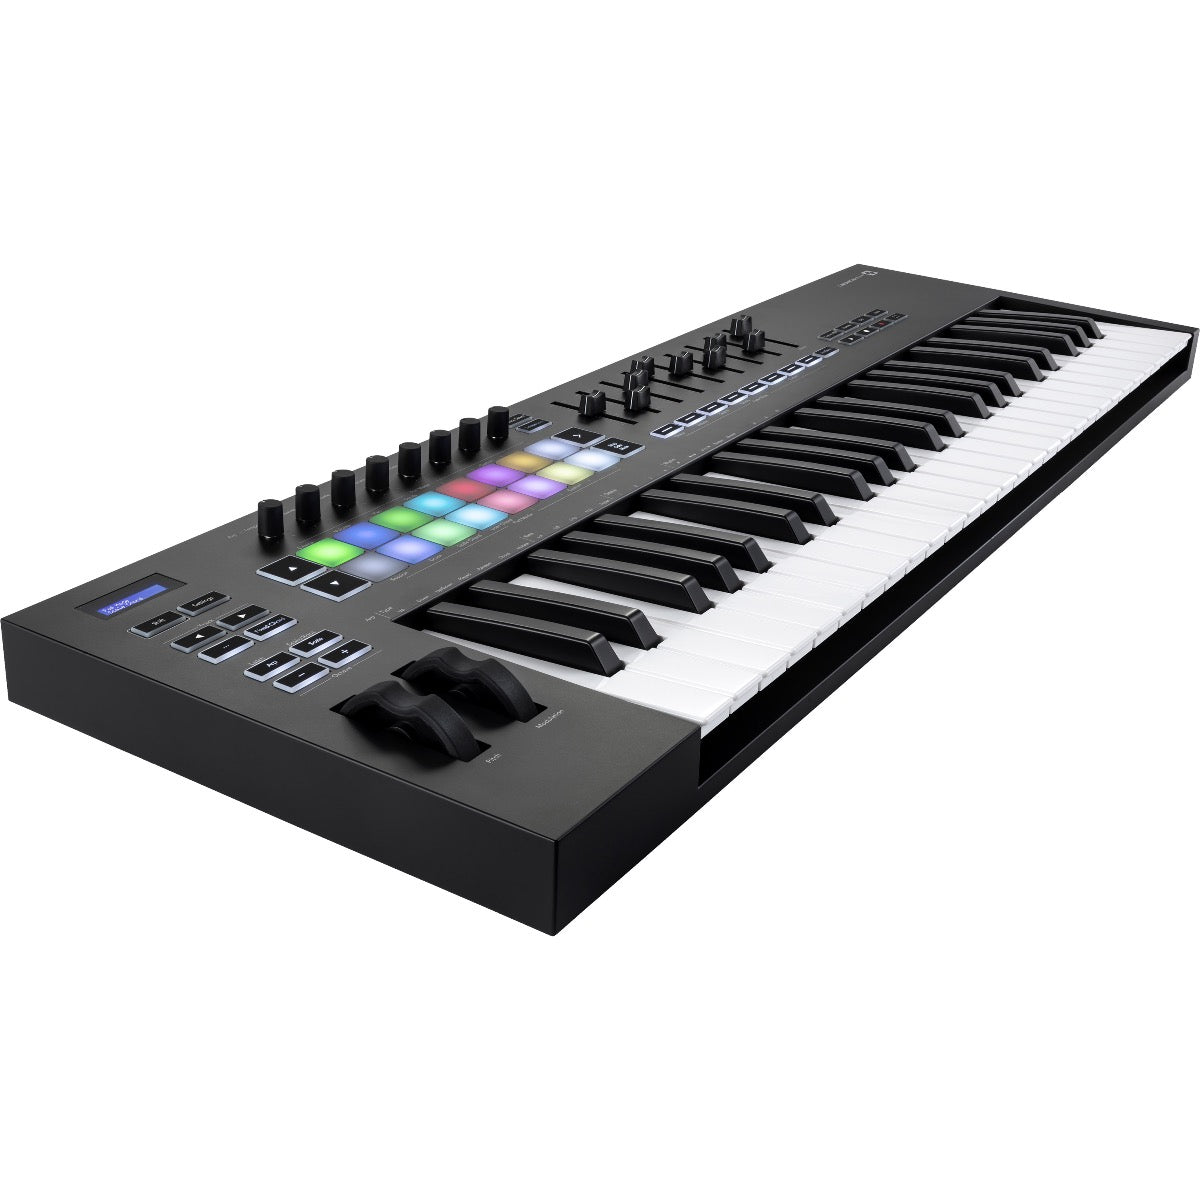 3/4 view of Novation Launchkey 49 MK3 Keyboard Controller showing top, front and left side